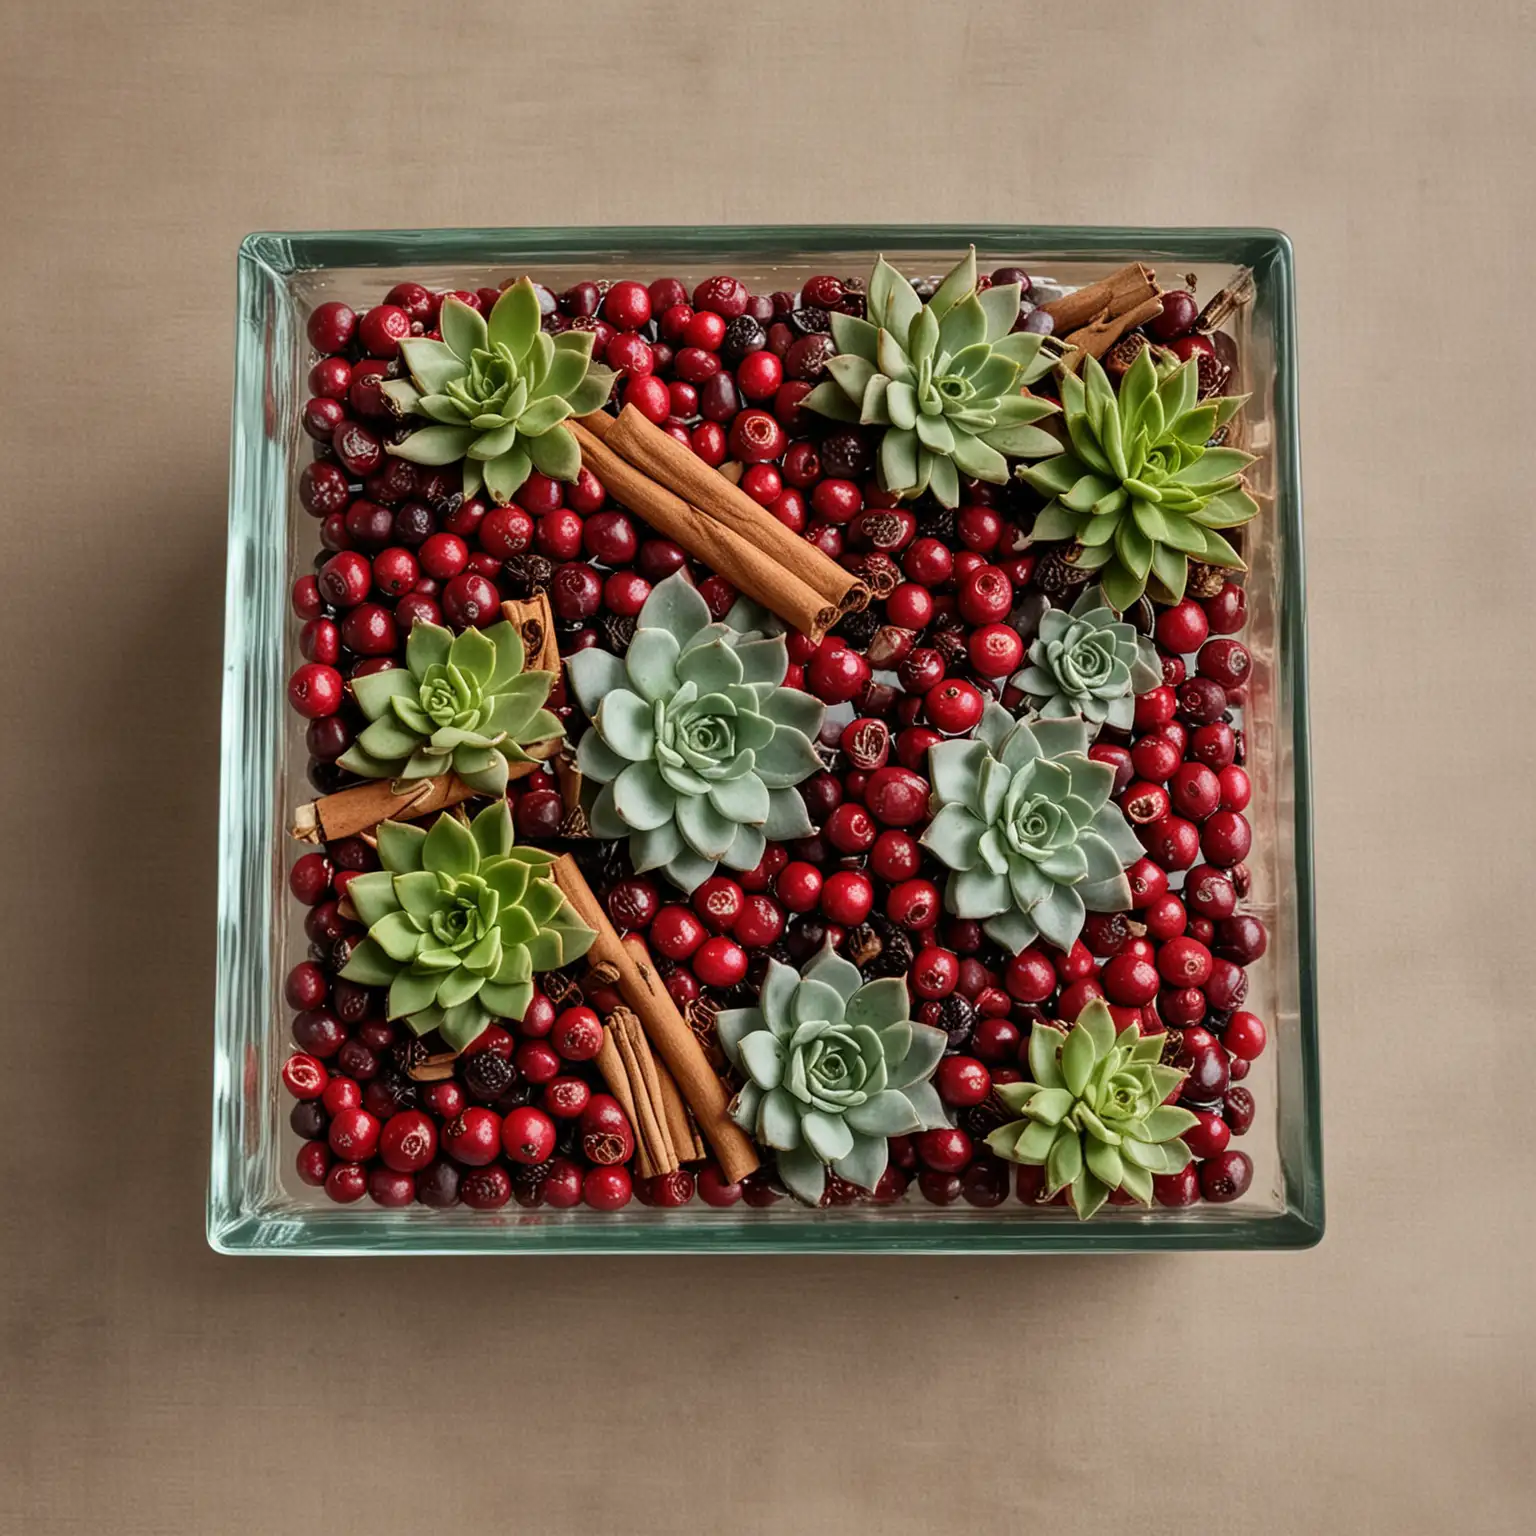 a simple and small realistic fall centerpiece that includes succulents and cinnamon sticks in a symmetrical square glass vase filled with cranberries and water; create the image from the side view as one would see it while sitting at the table and looking at the centerpiece